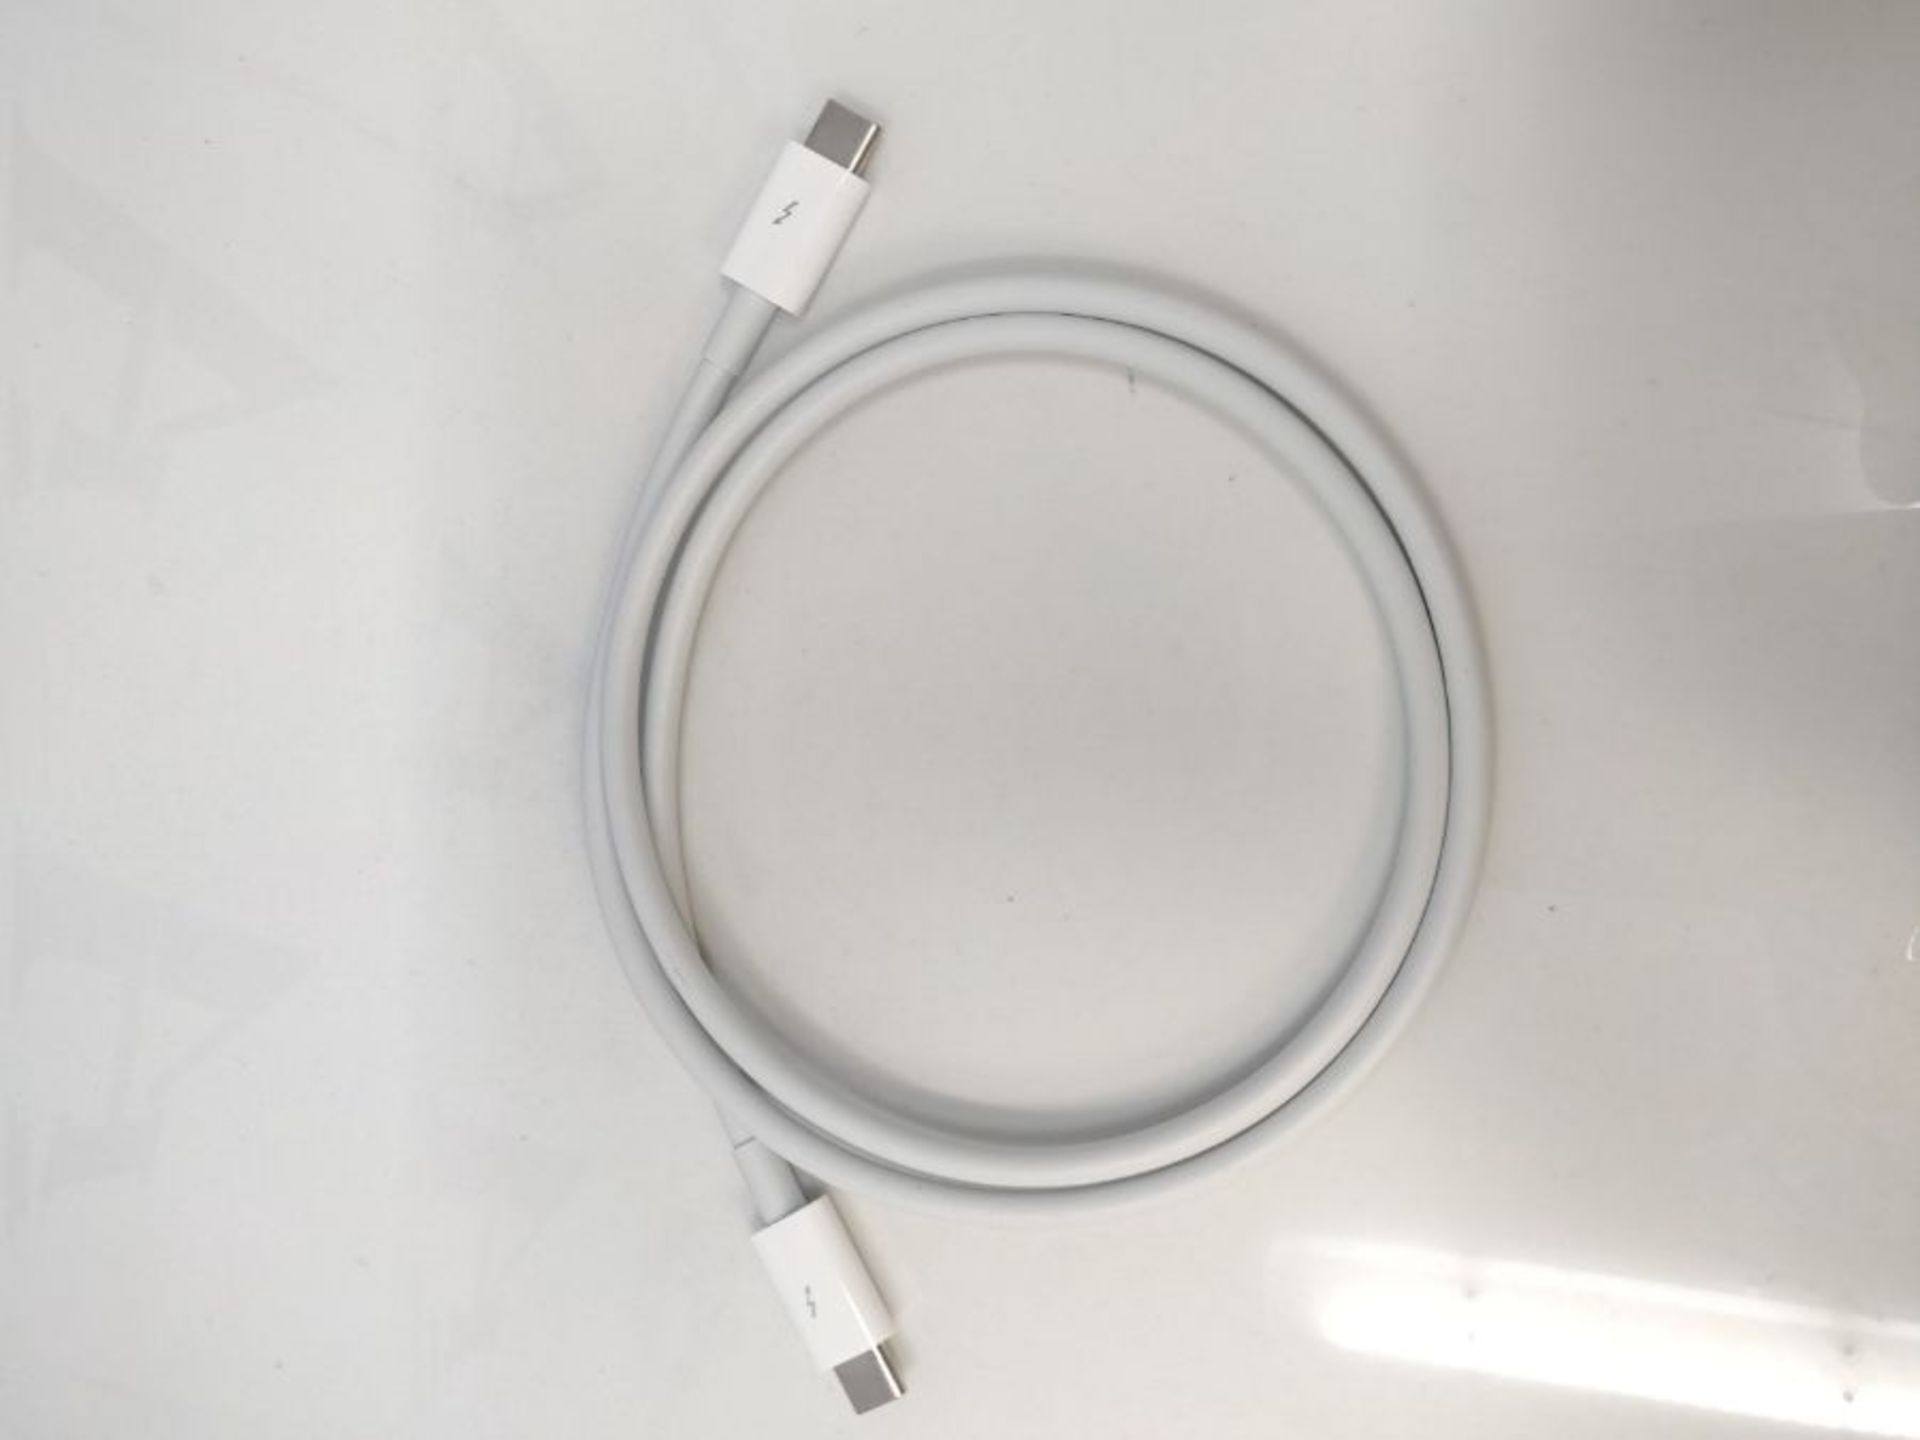 Thunderbolt 3 (USB-C) Cable (0.8m) - Image 3 of 3